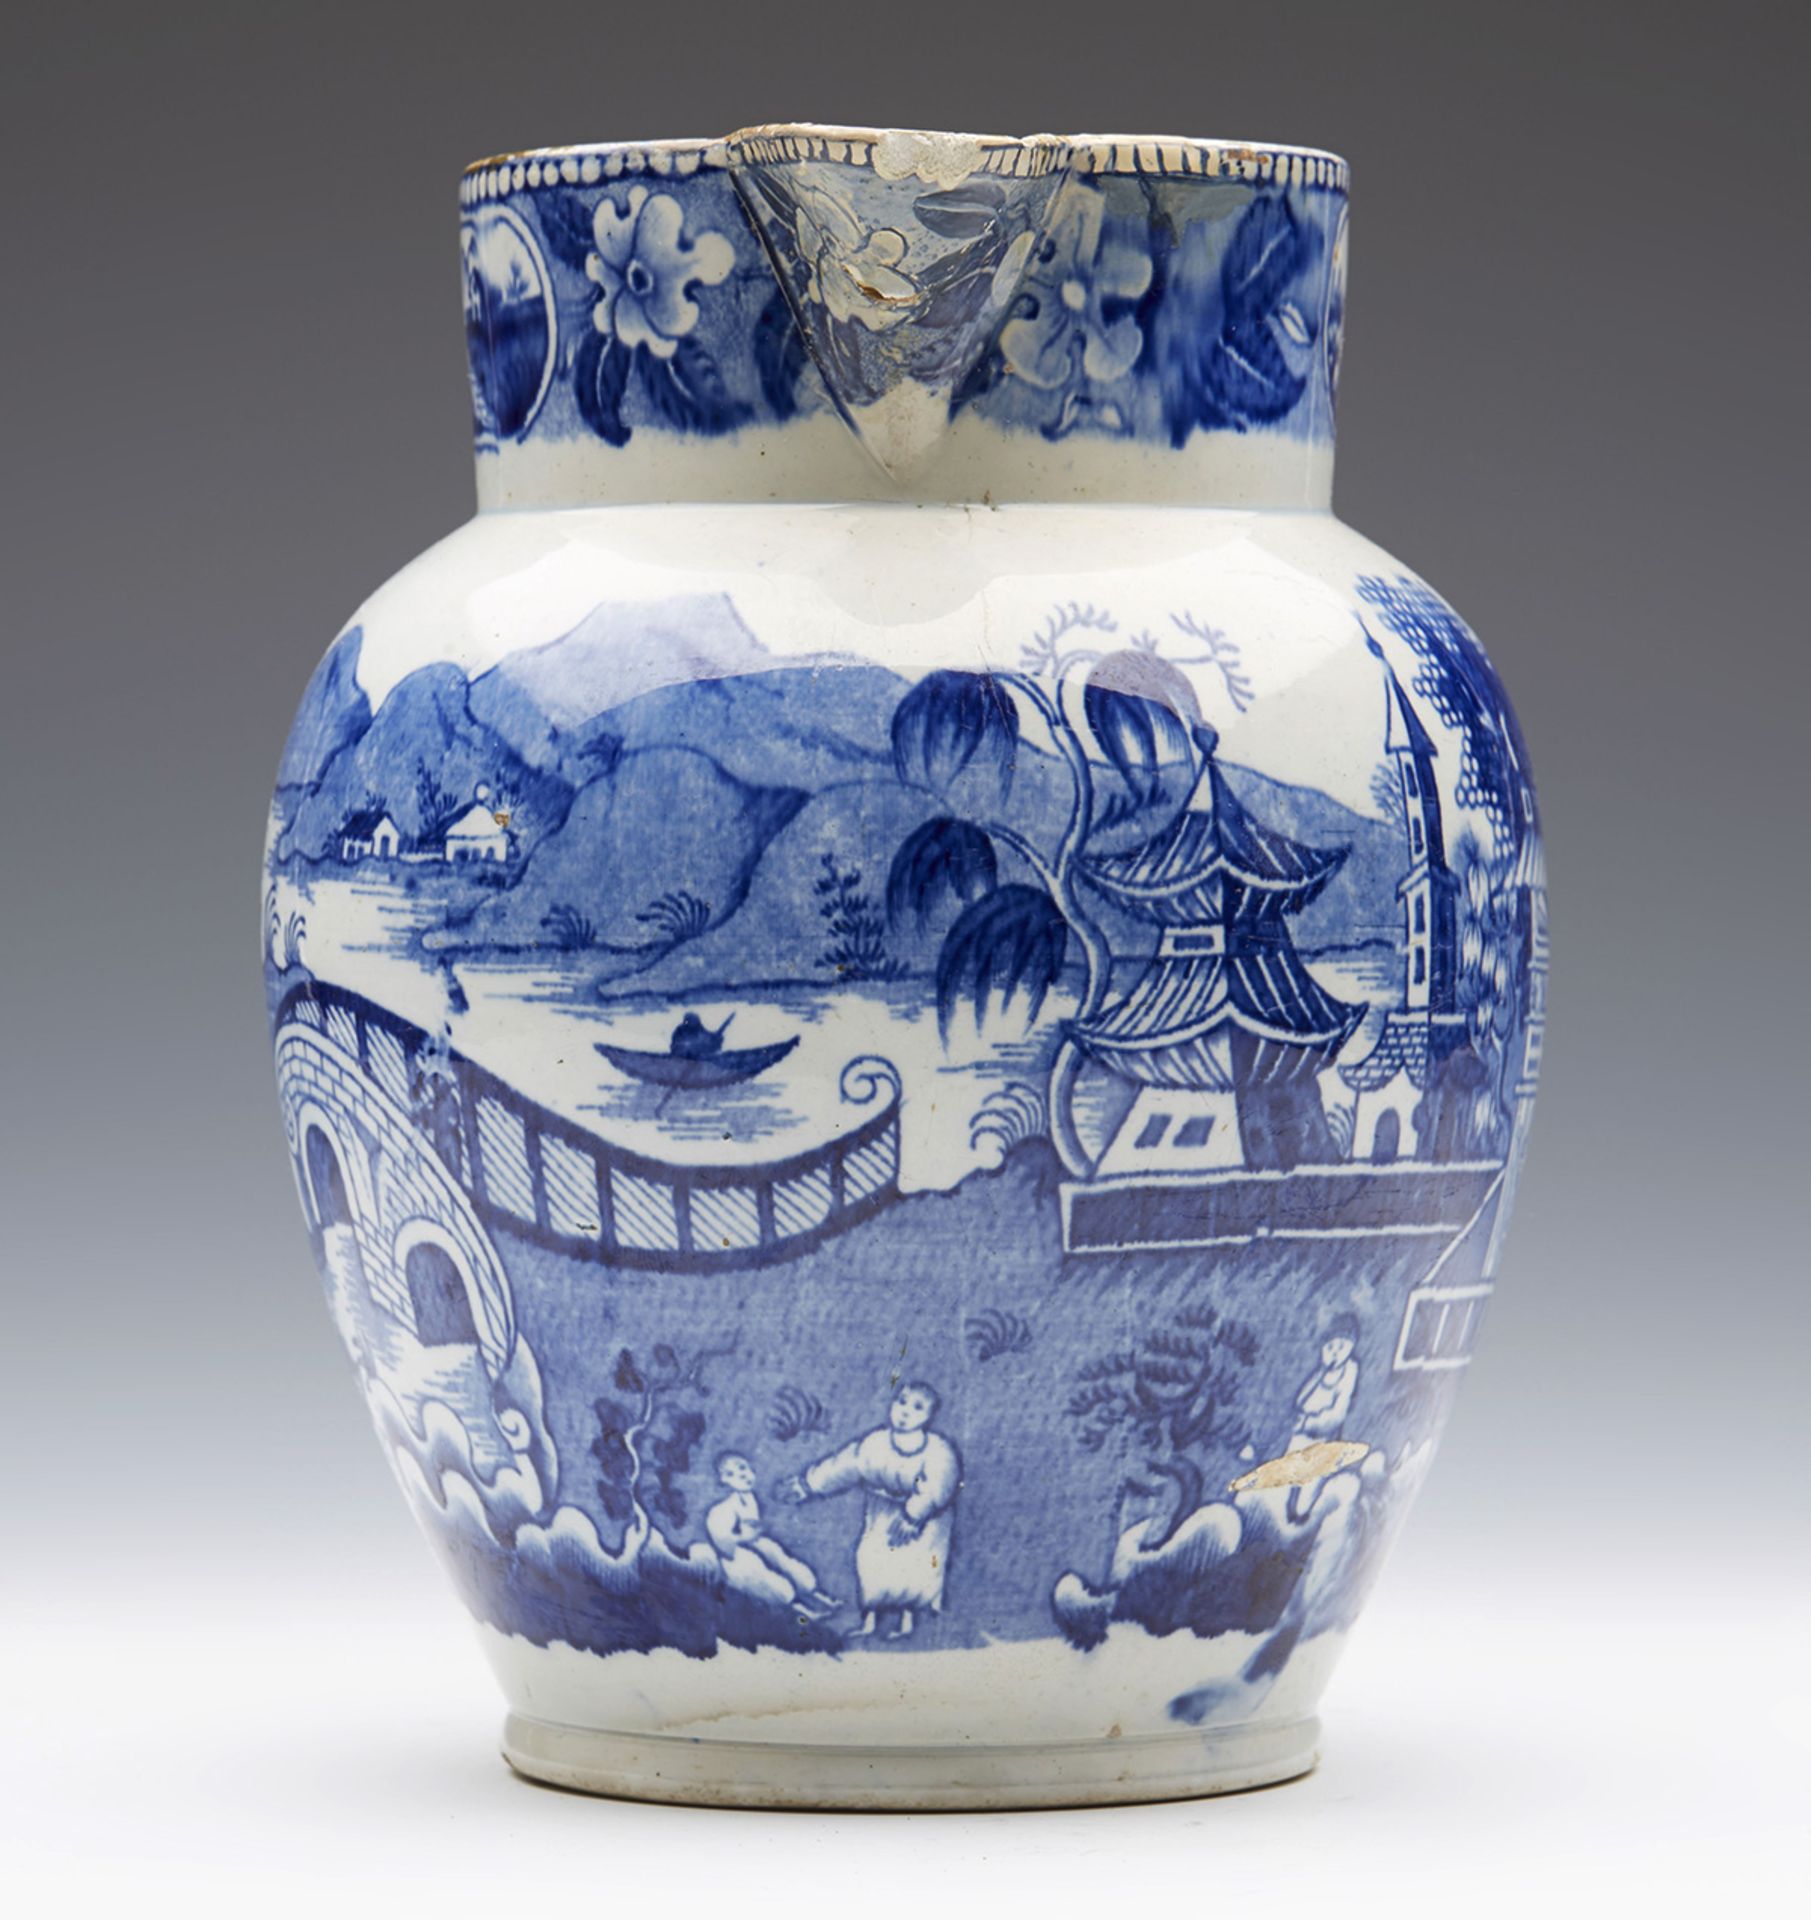 ANTIQUE ENGLISH PEARLWARE BLUE & WHITE CHINOISERIE HANDLED JUG LATE 18TH C. - Image 3 of 8